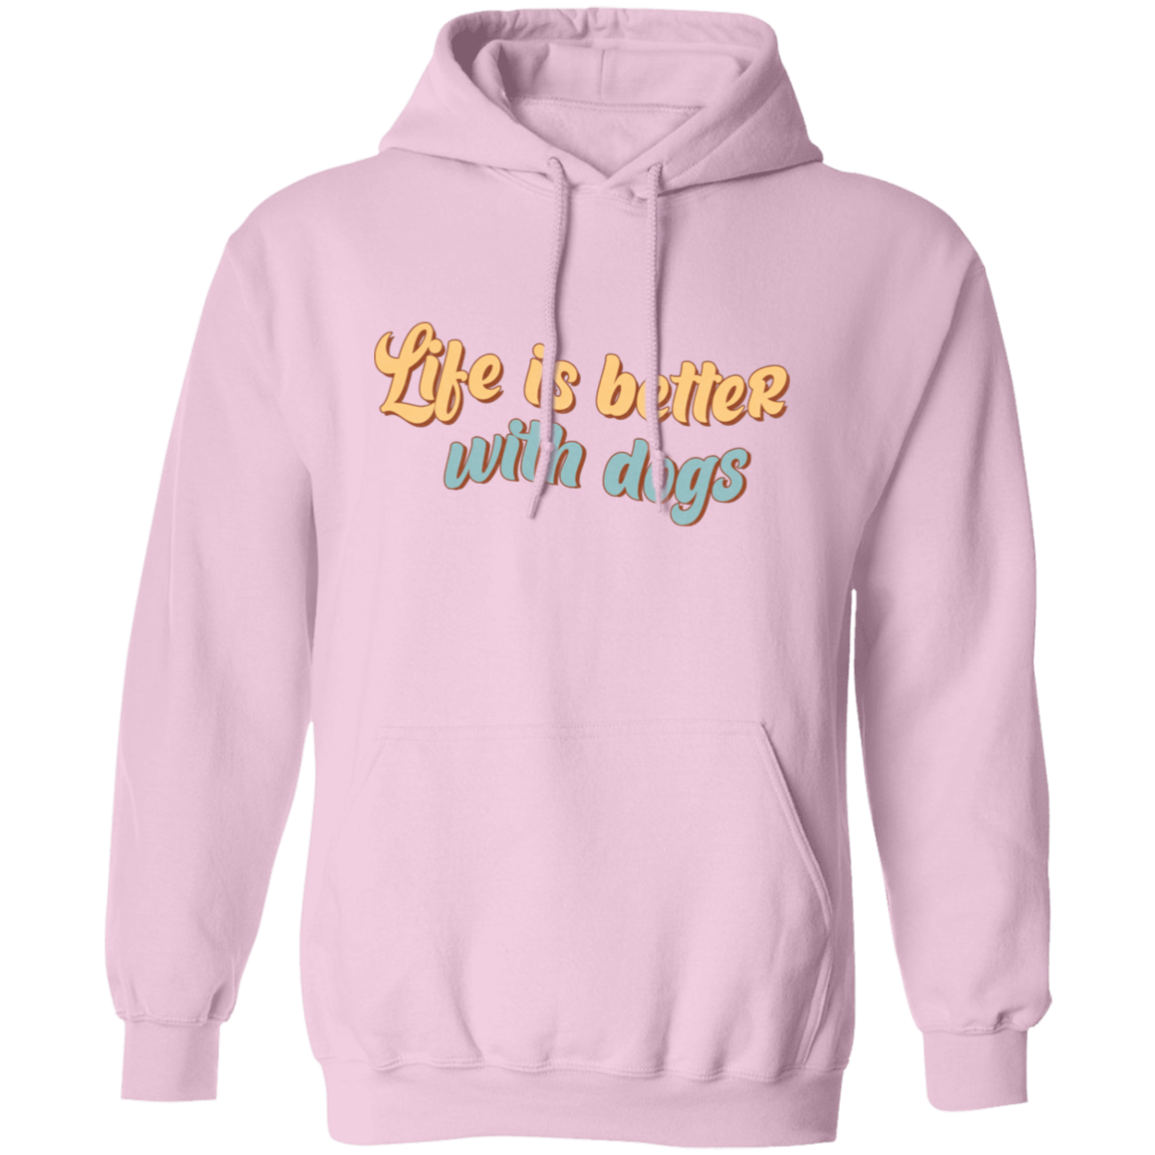 Life is Better with Dogs Pullover Hoodie Hooded Sweatshirt